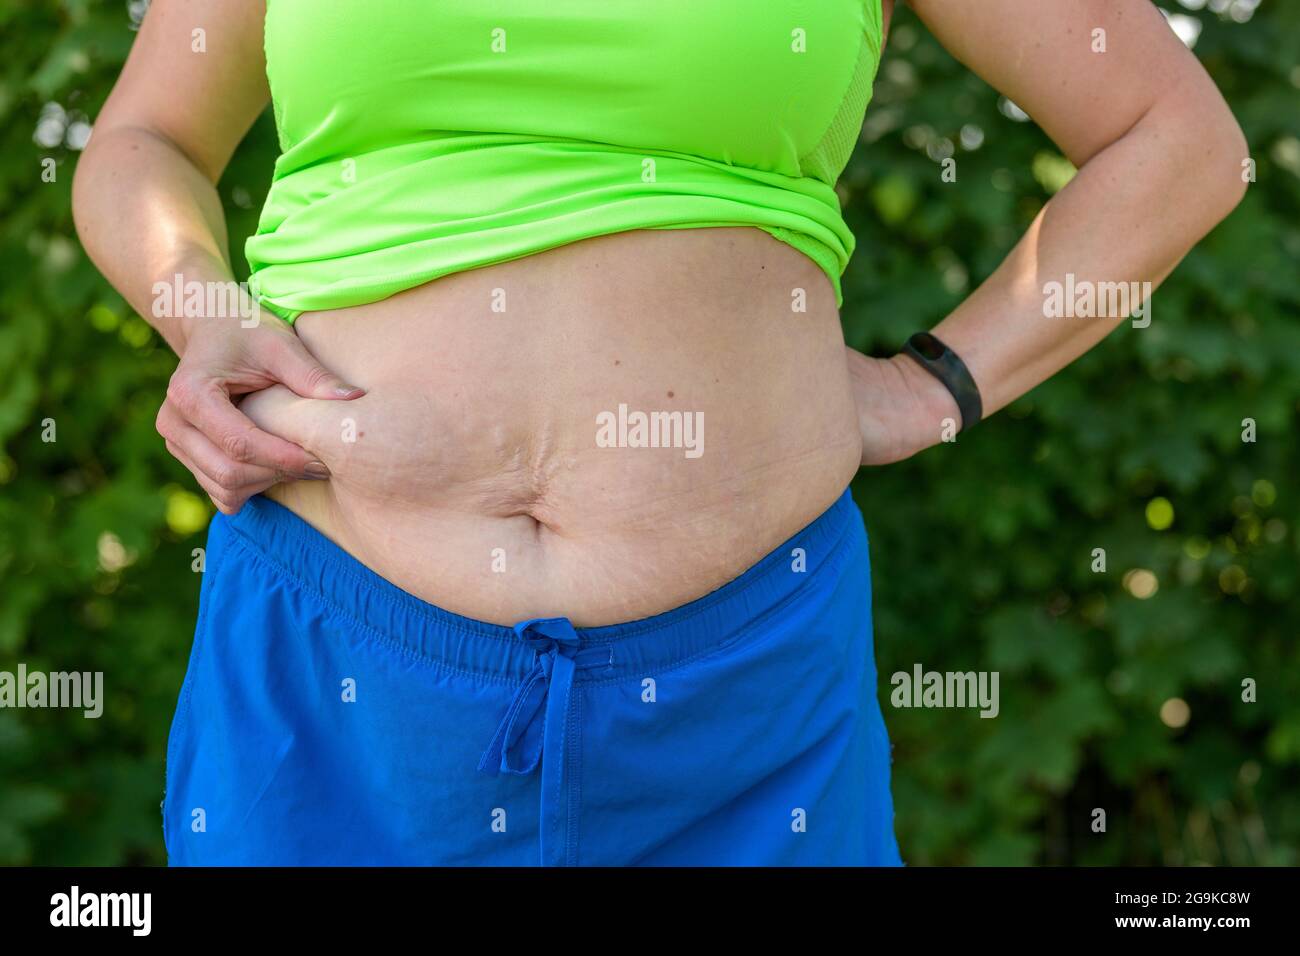 Overweight woman pinching the excess fat on her stomach between her fingers in a close up view of her midriff in sporting attire Stock Photo